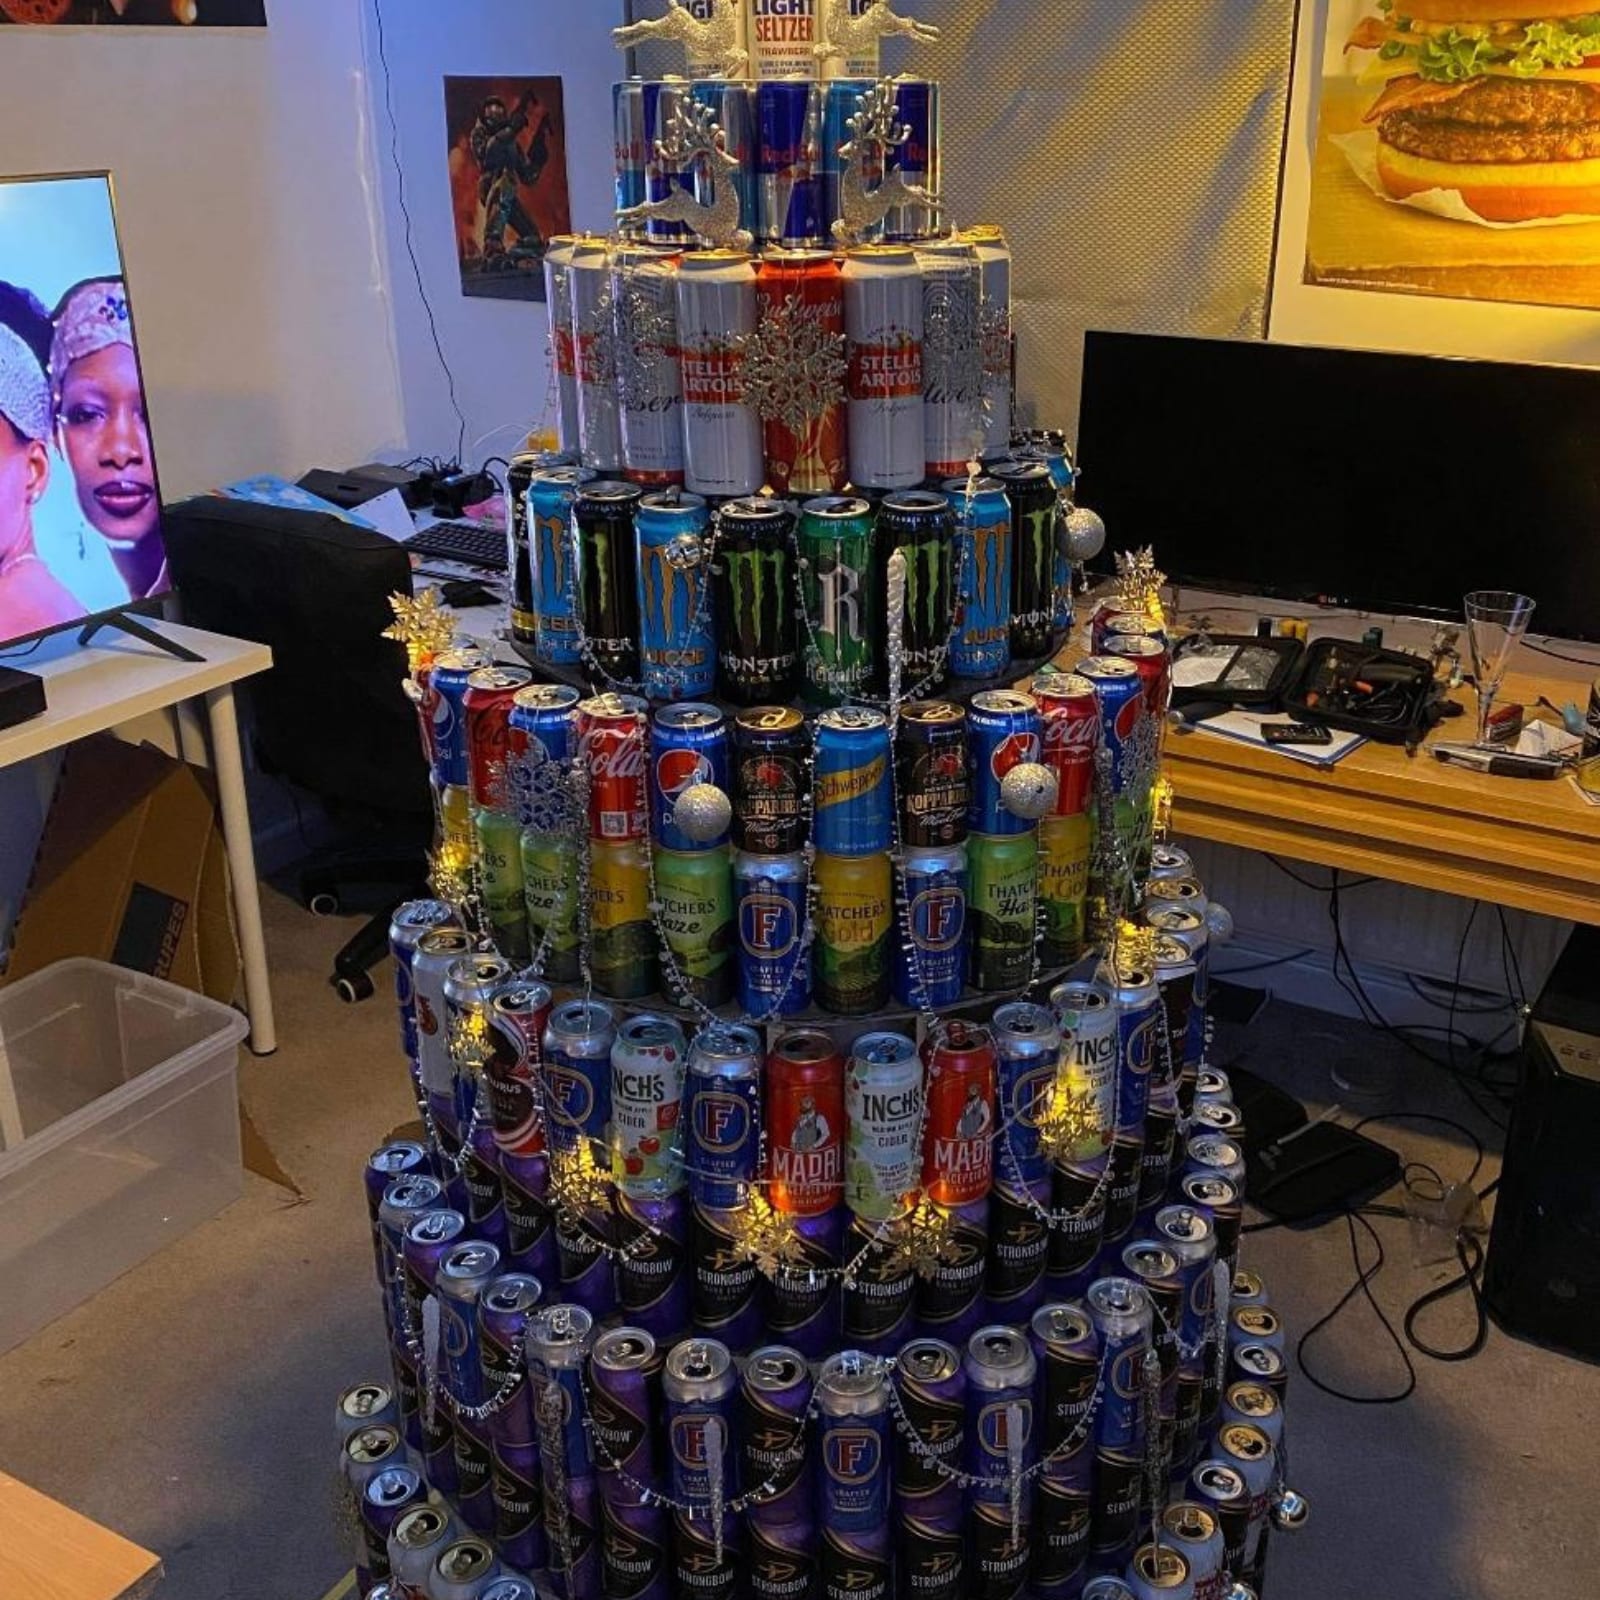 DIY Beer Cake Tower with real cake on the top | under $20 - YouTube